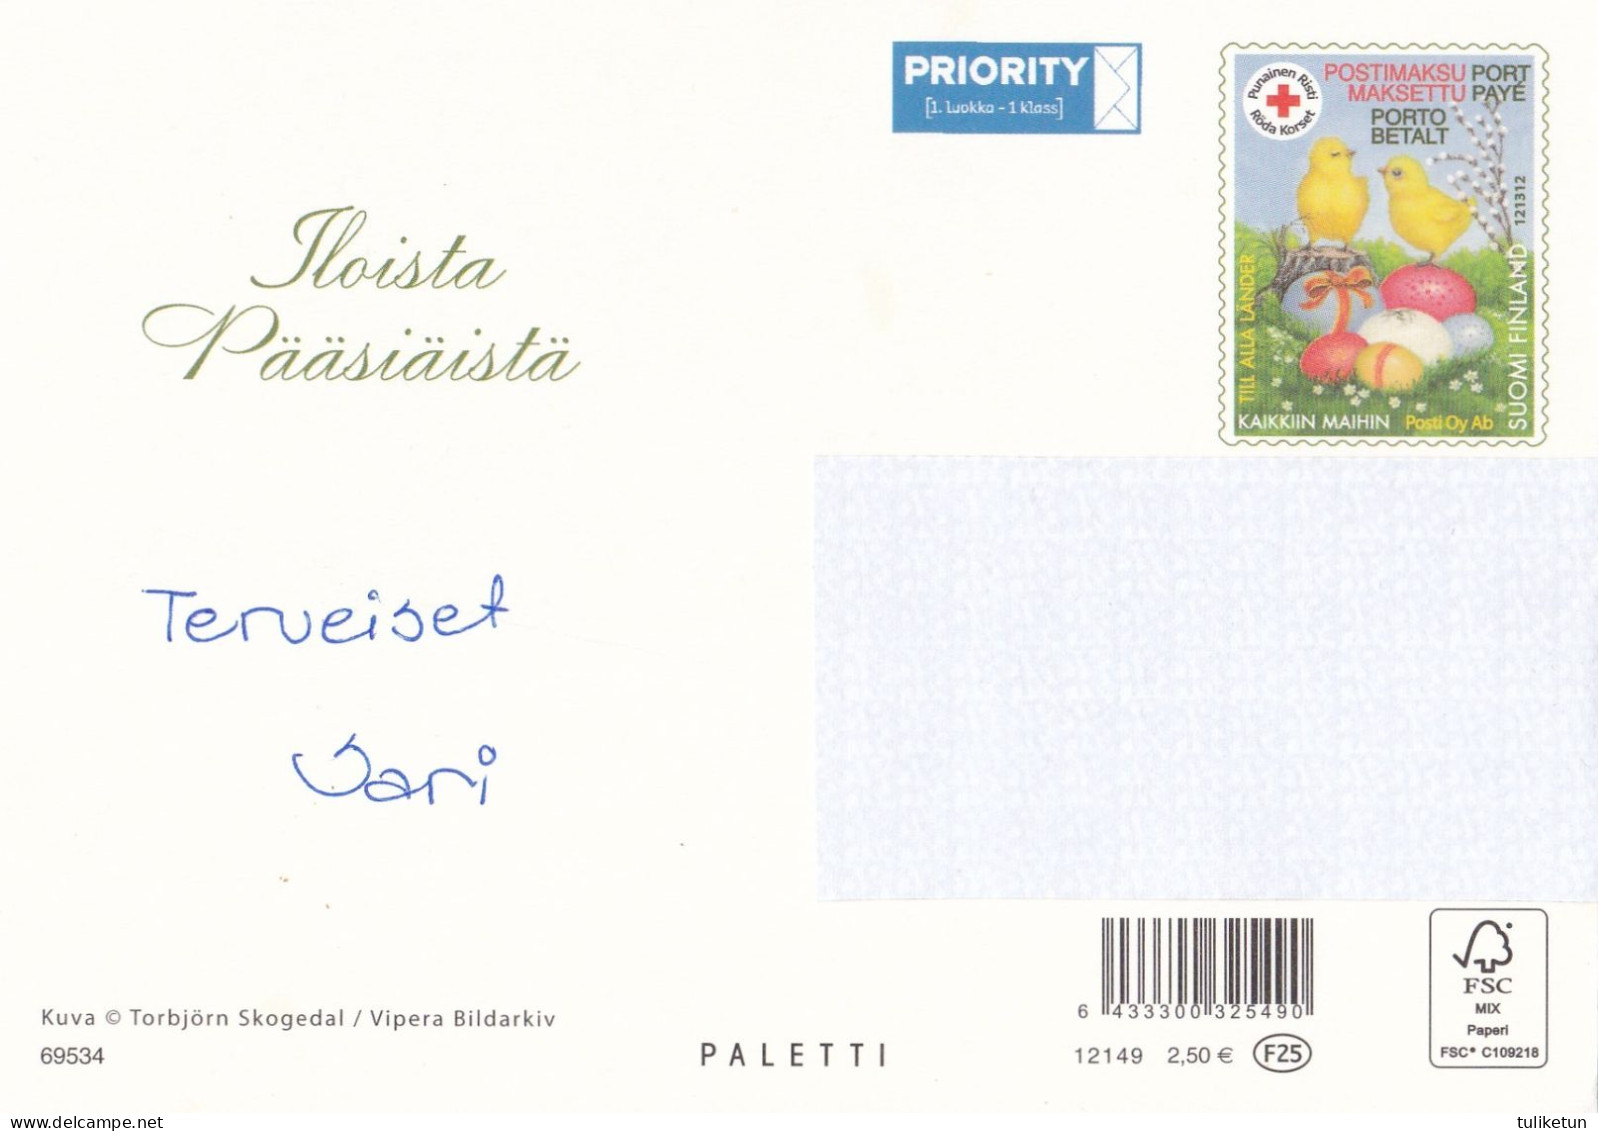 Postal Stationery - Easter Flowers - Daffodils - Narcissus - Red Cross - Suomi Finland - Postage Paid - Postal Stationery